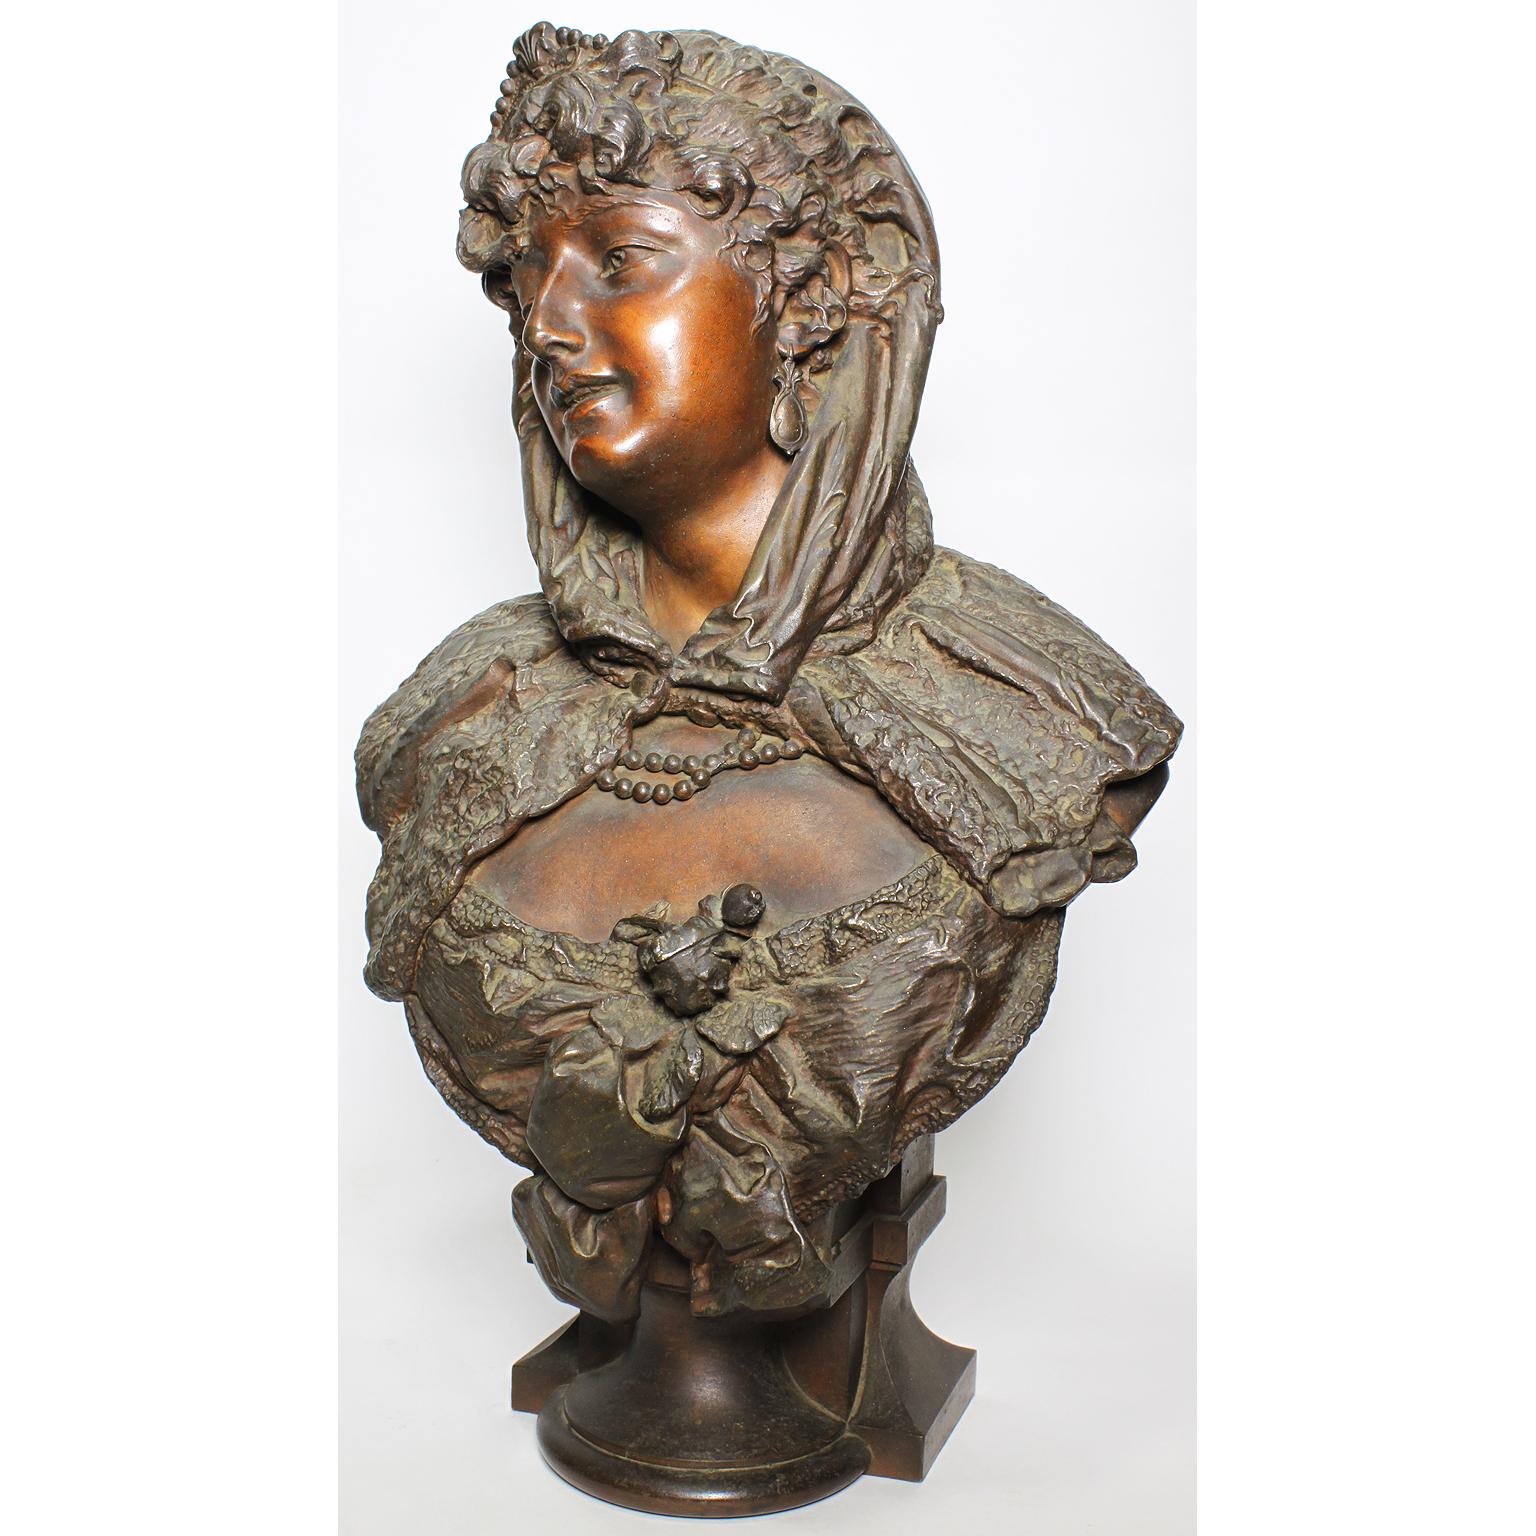 Rococo Revival 19th Century Patinated Spelter Bust Figure of a Young Girl, Attributed to Hottot For Sale